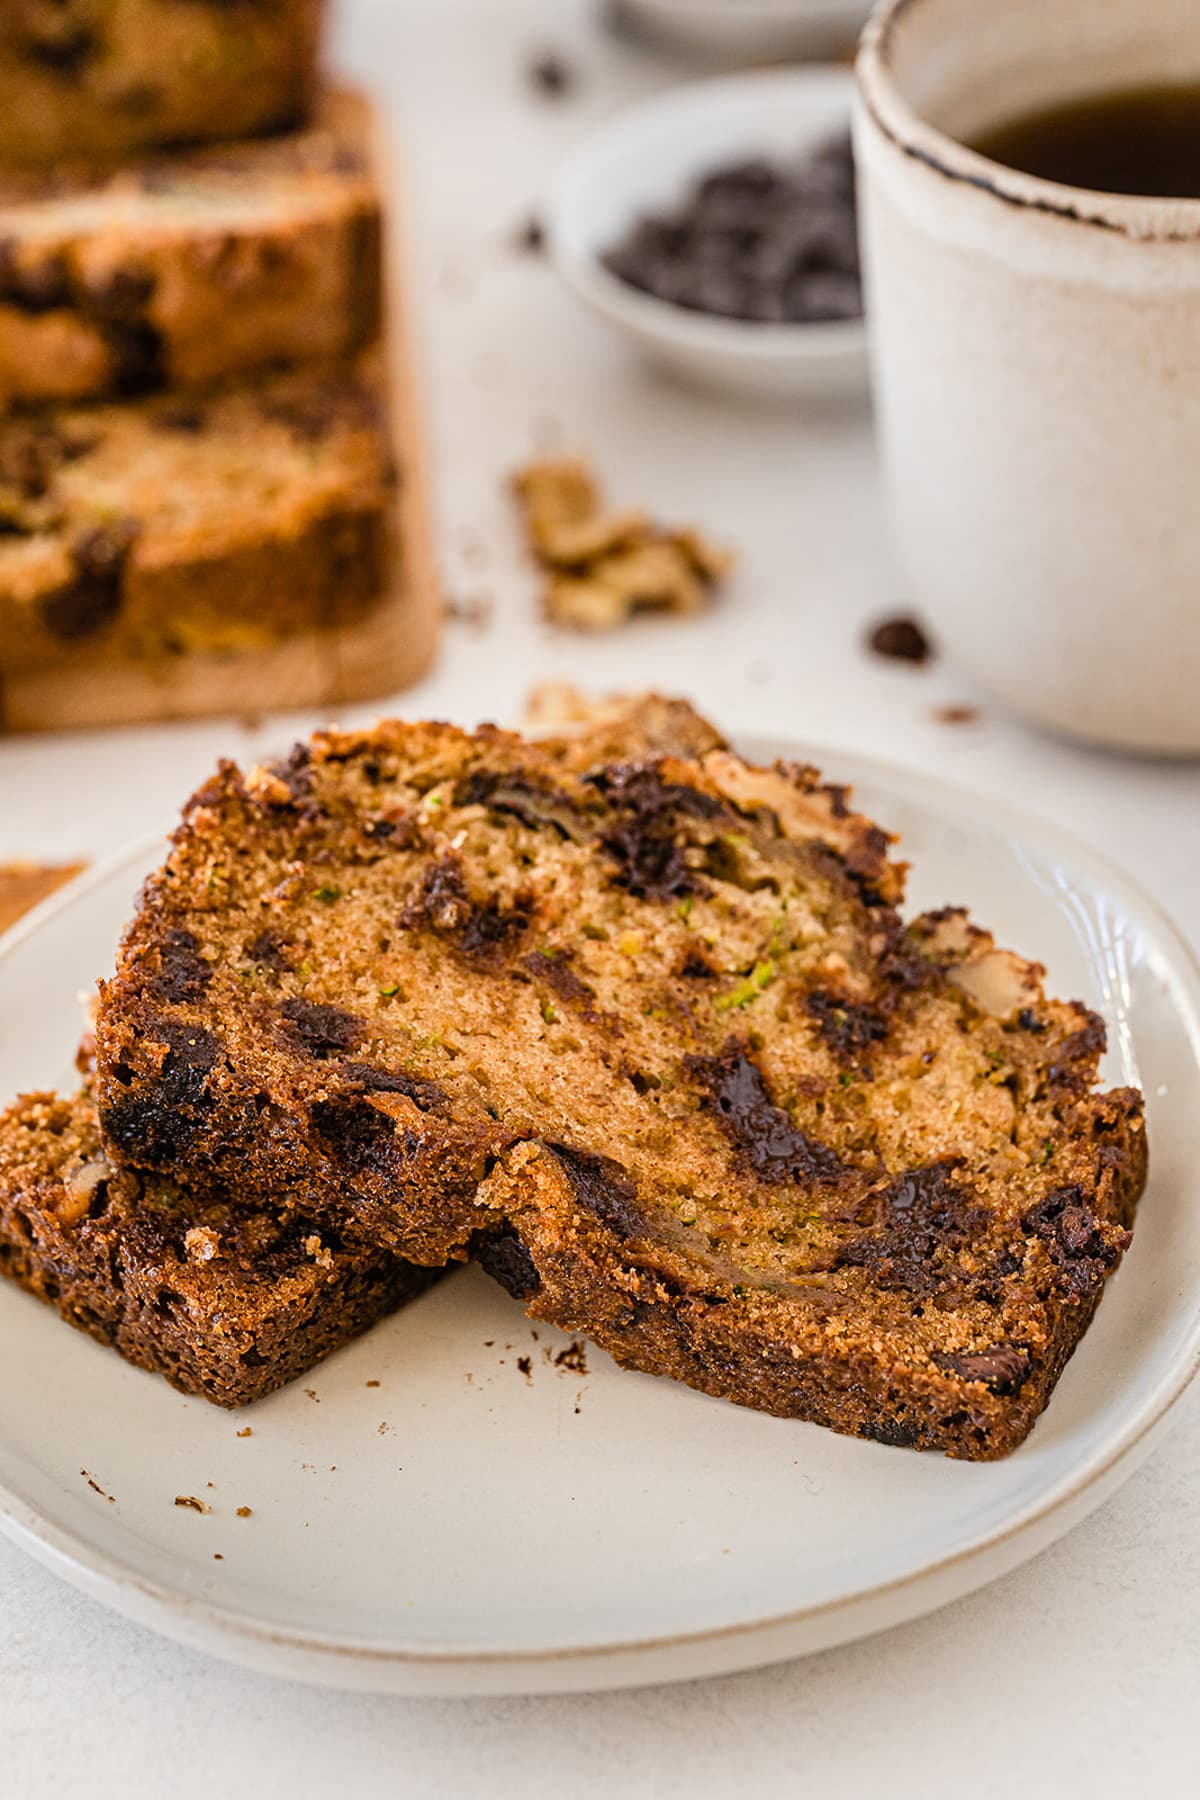 Two slices of chocolate chip zucchini bread with walnuts on a plate with the rest of the slices from the loaf and a cup of coffee in the background on the table.